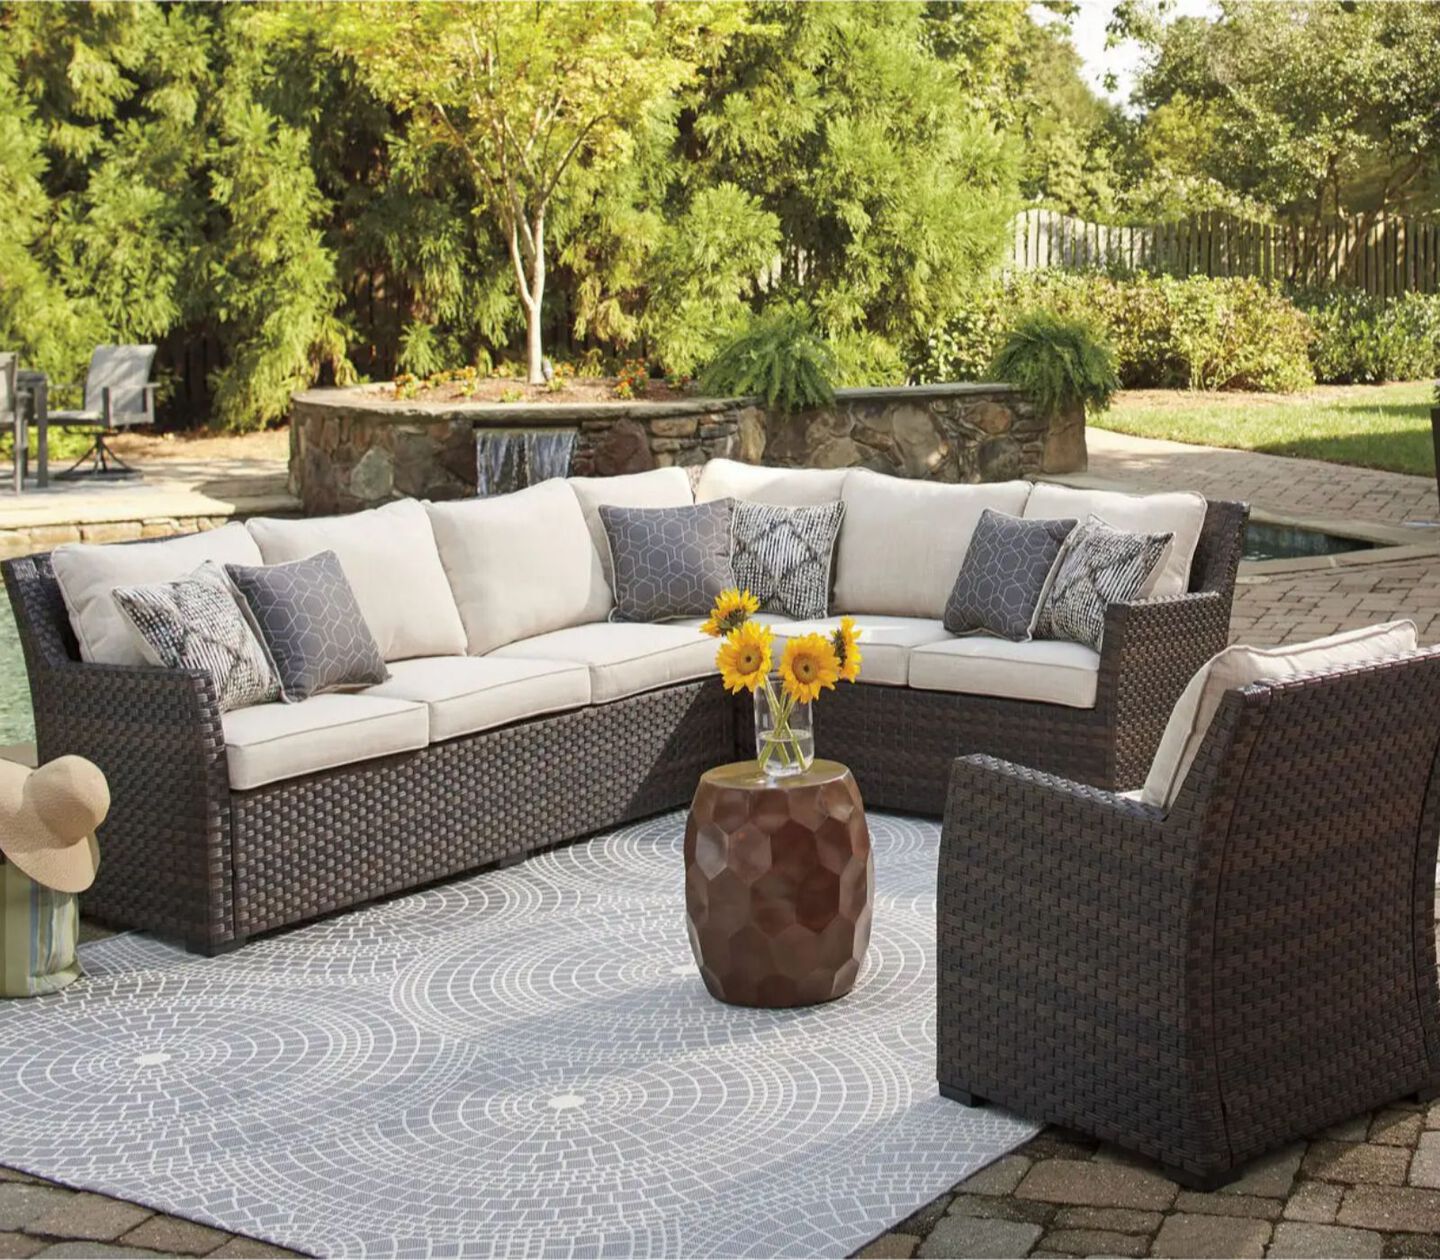 Brown patio sectional with light beige cushions surrounding small metal table with sunflowers